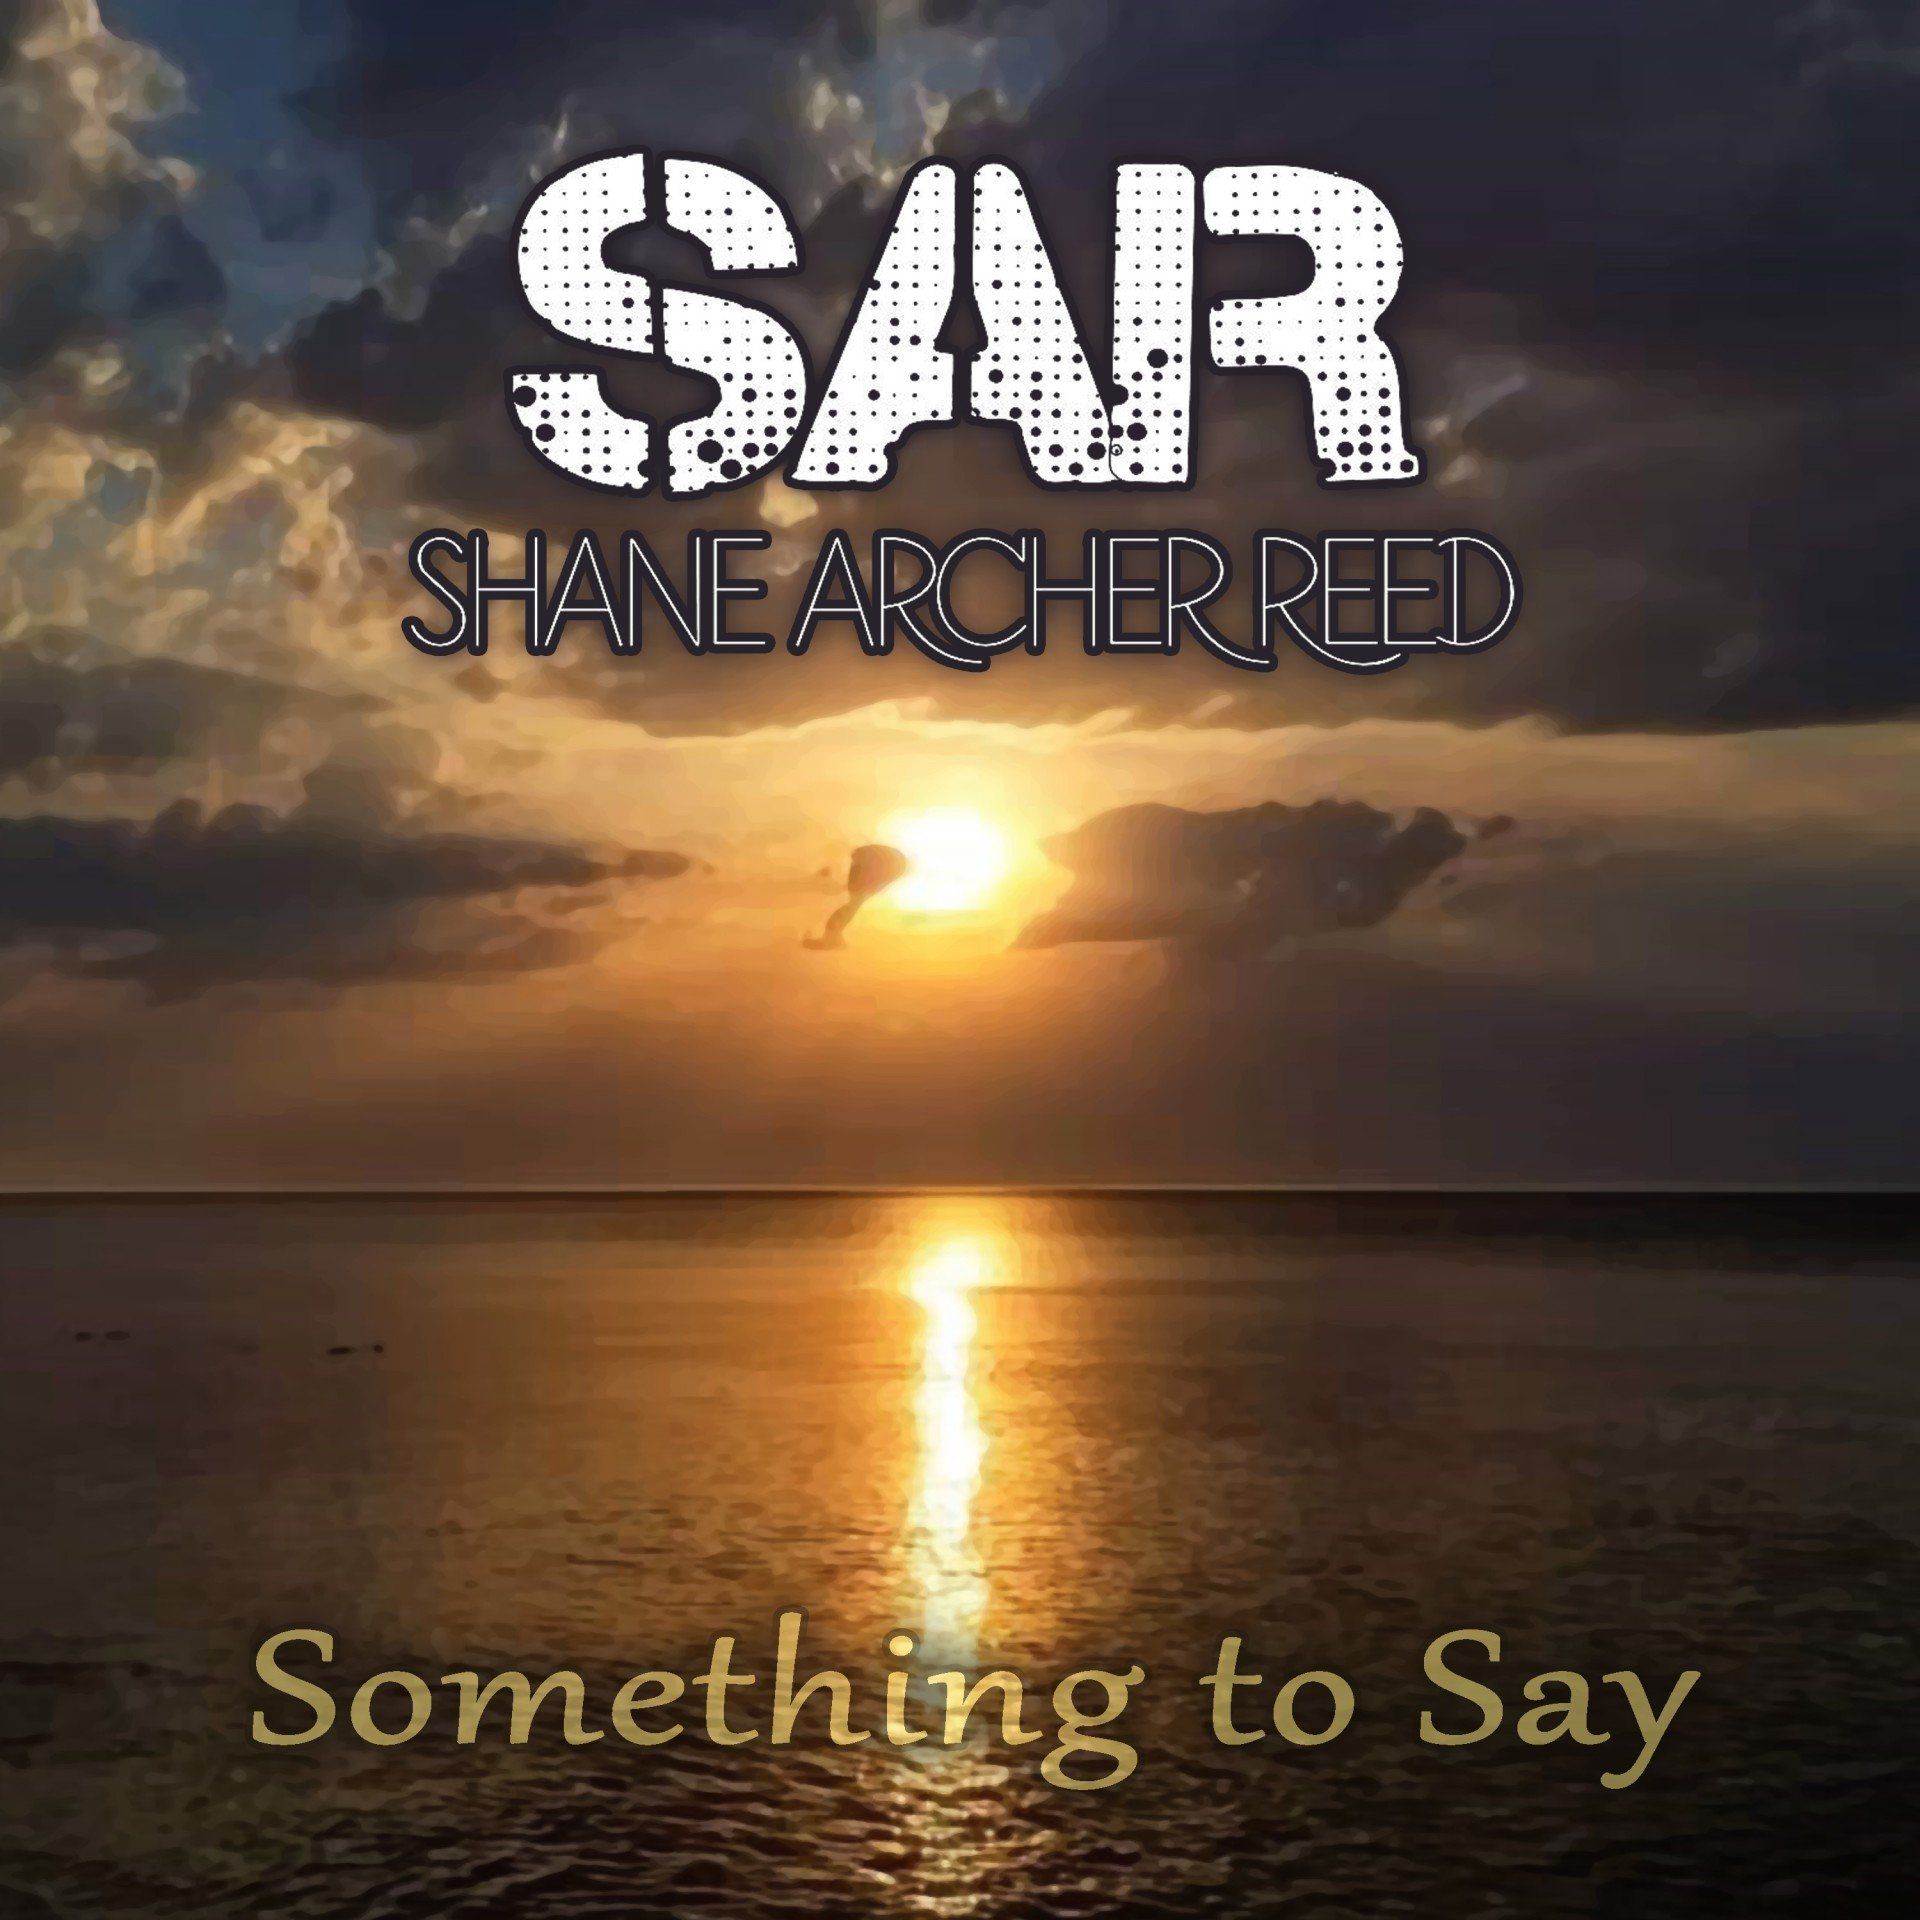 Something To Say by Shane Archer Reed